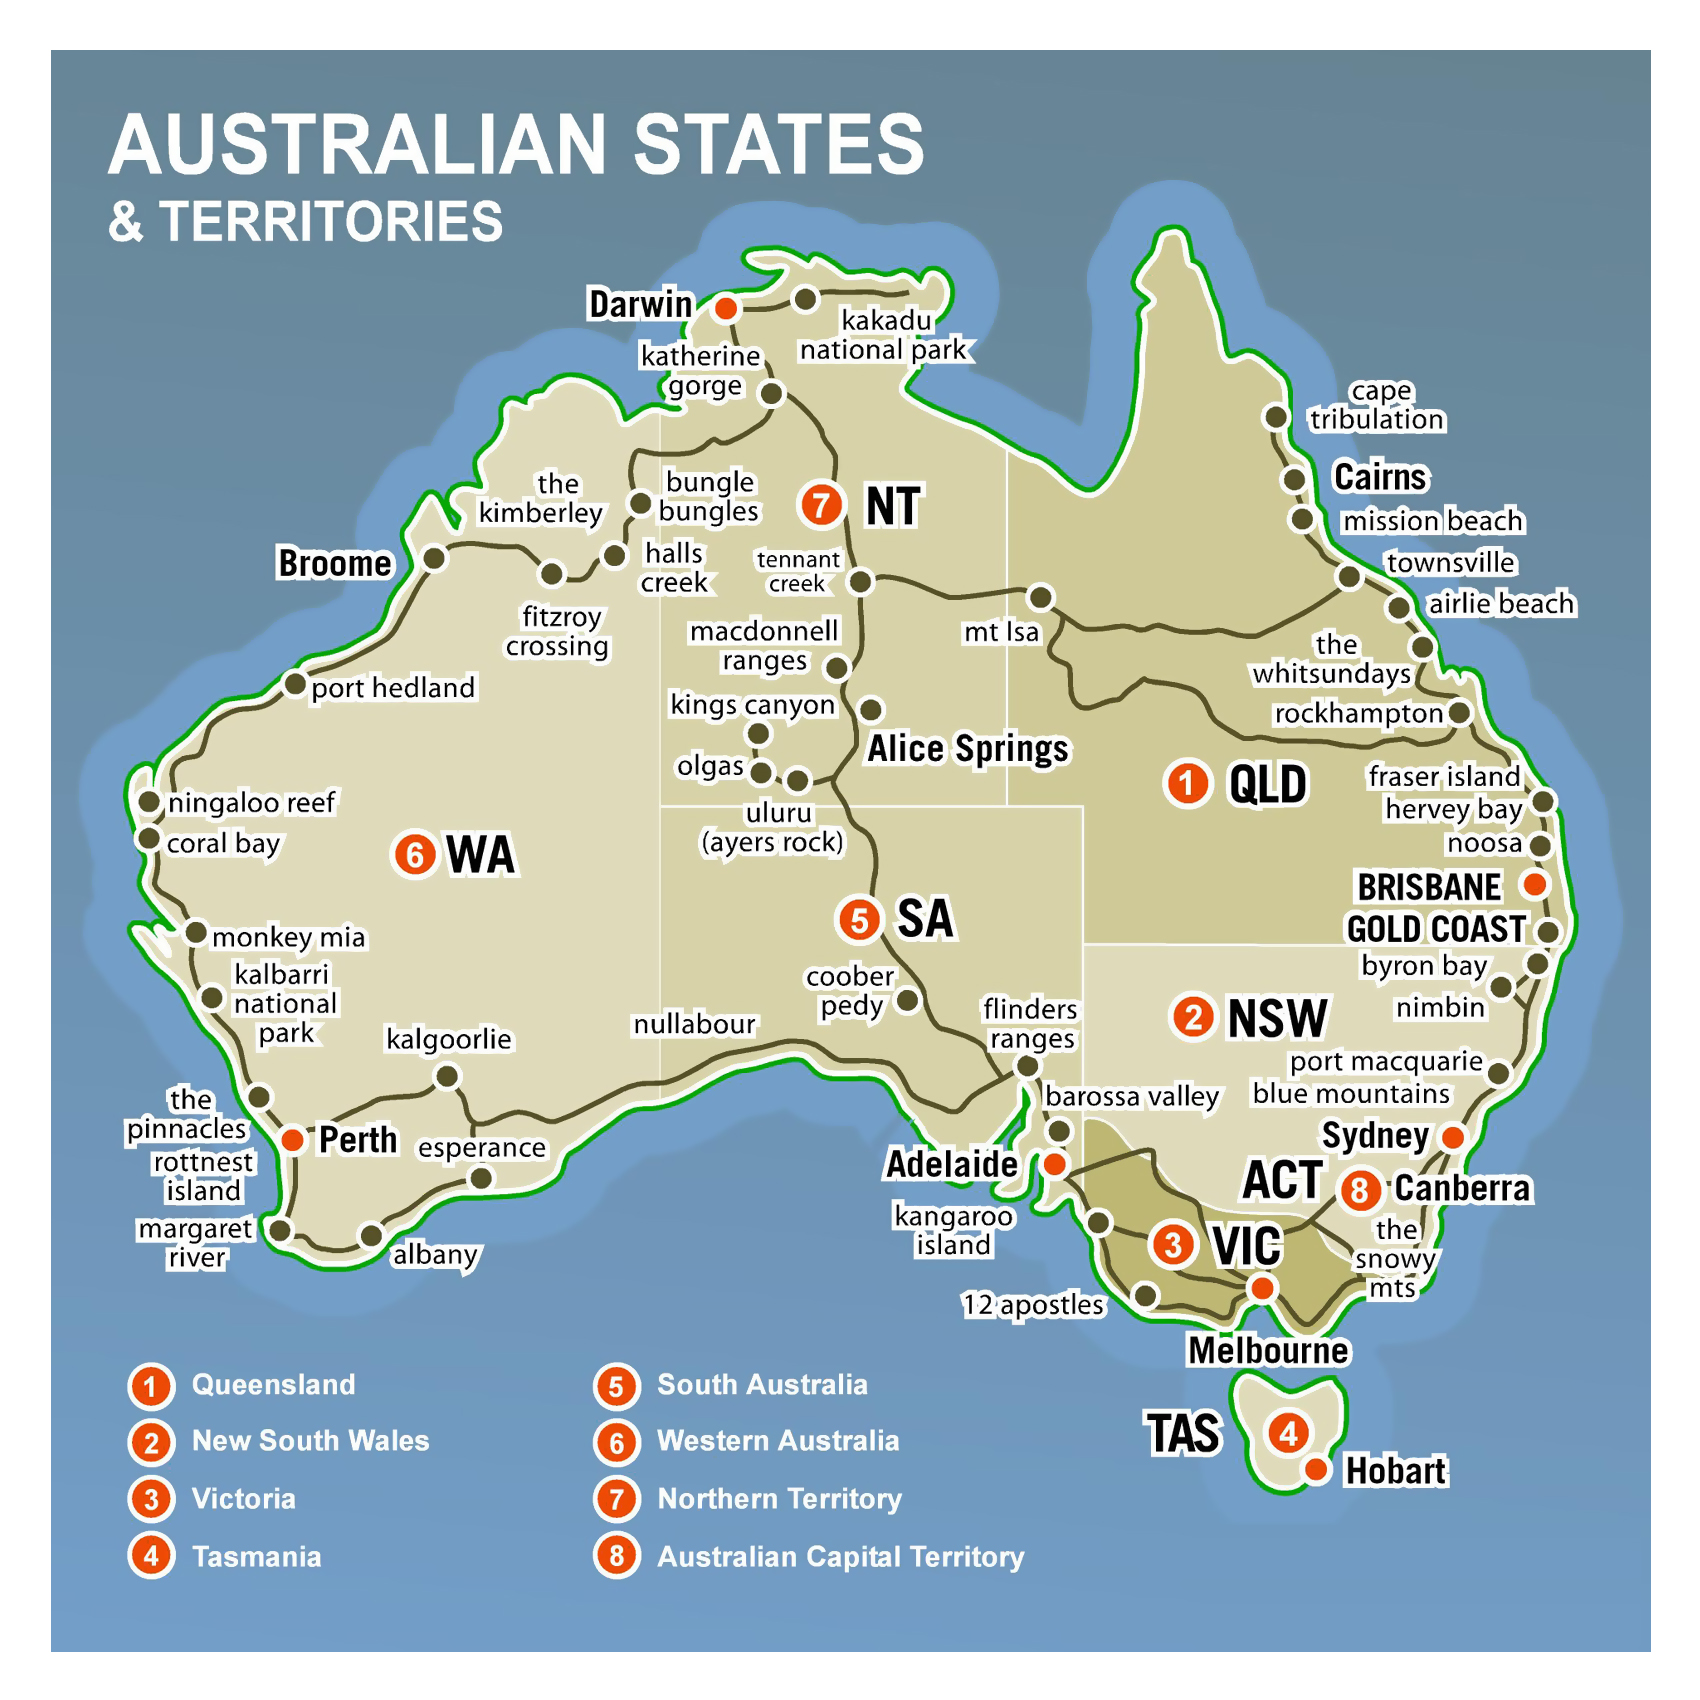 travelling between states in australia